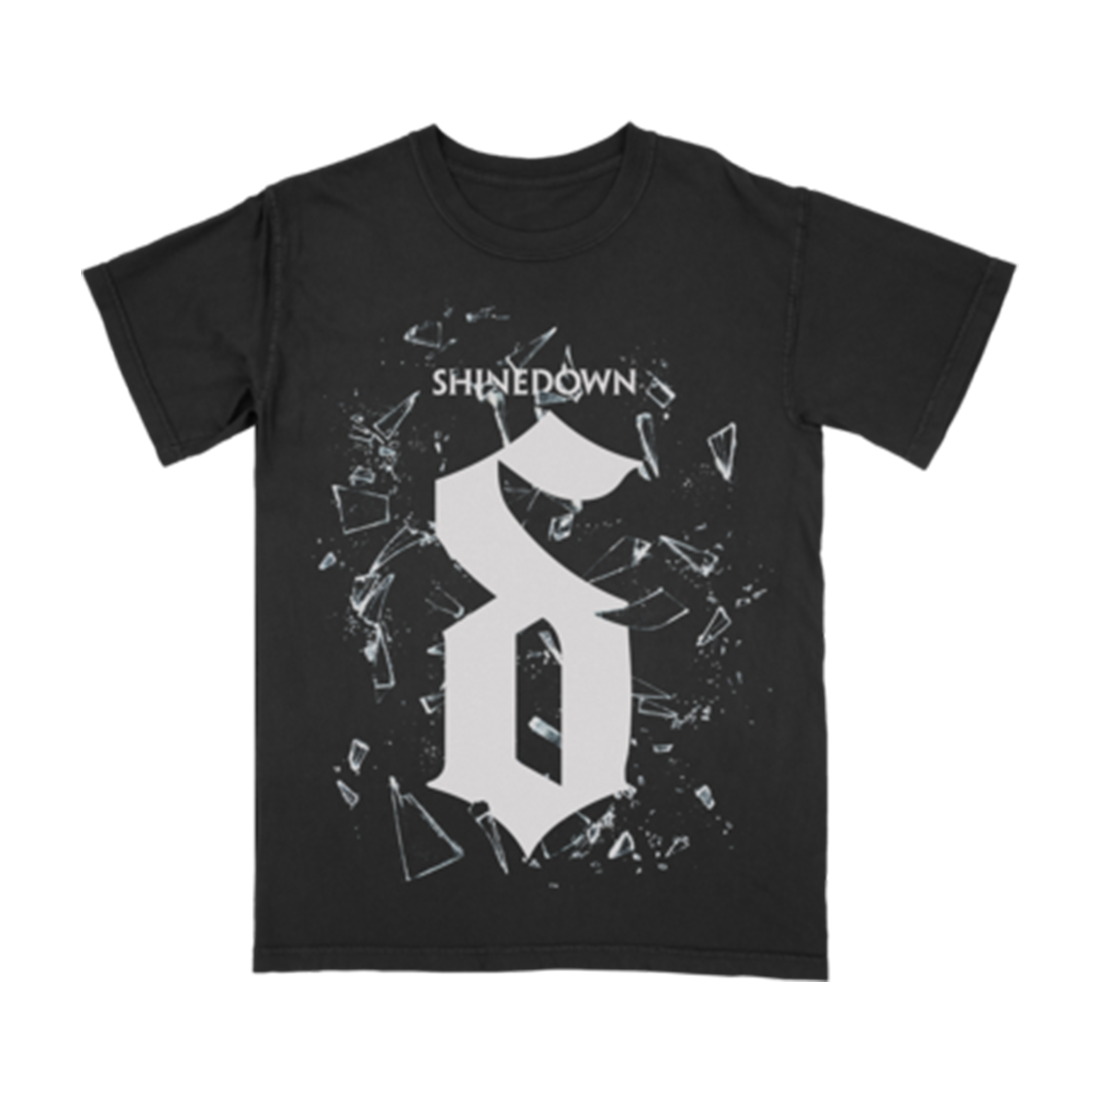 Shattered Tee